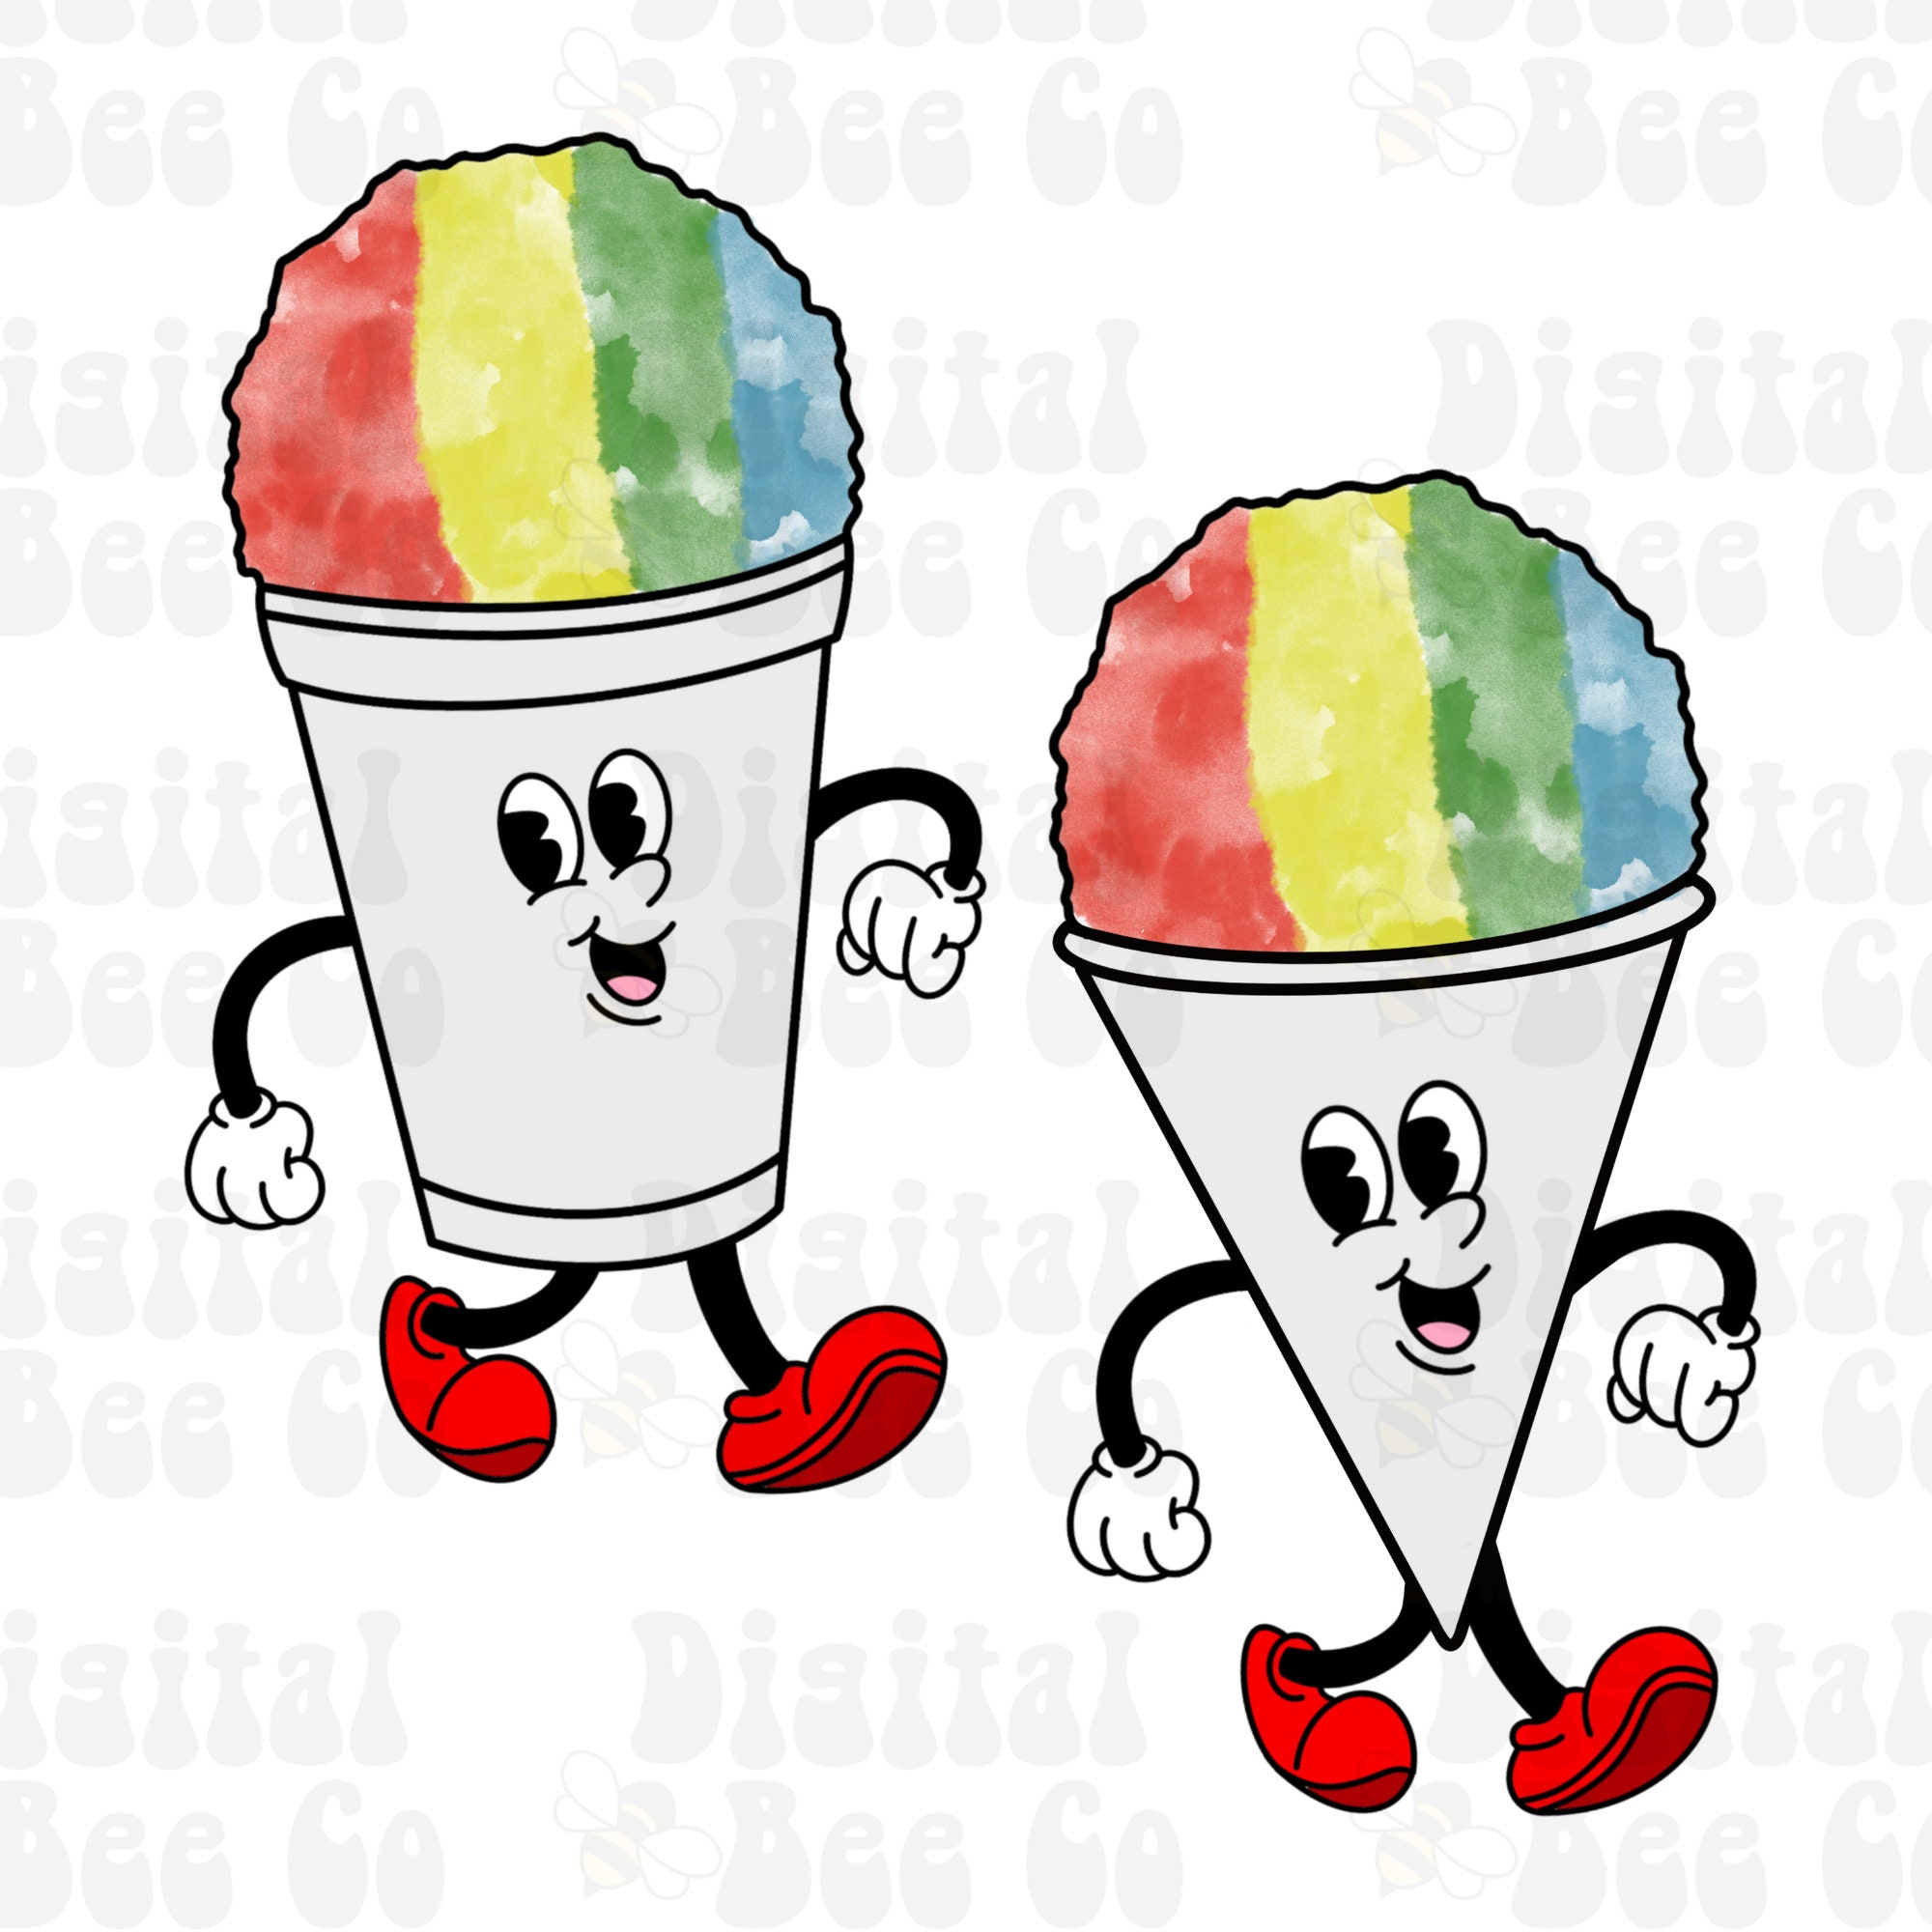 Sno-Ball Color Kit, Sno-ball, Snowcone, Rainbow color kit, New Orleans Art,  Home Malone, Kids, Craft, Summer Fun, Ice treat